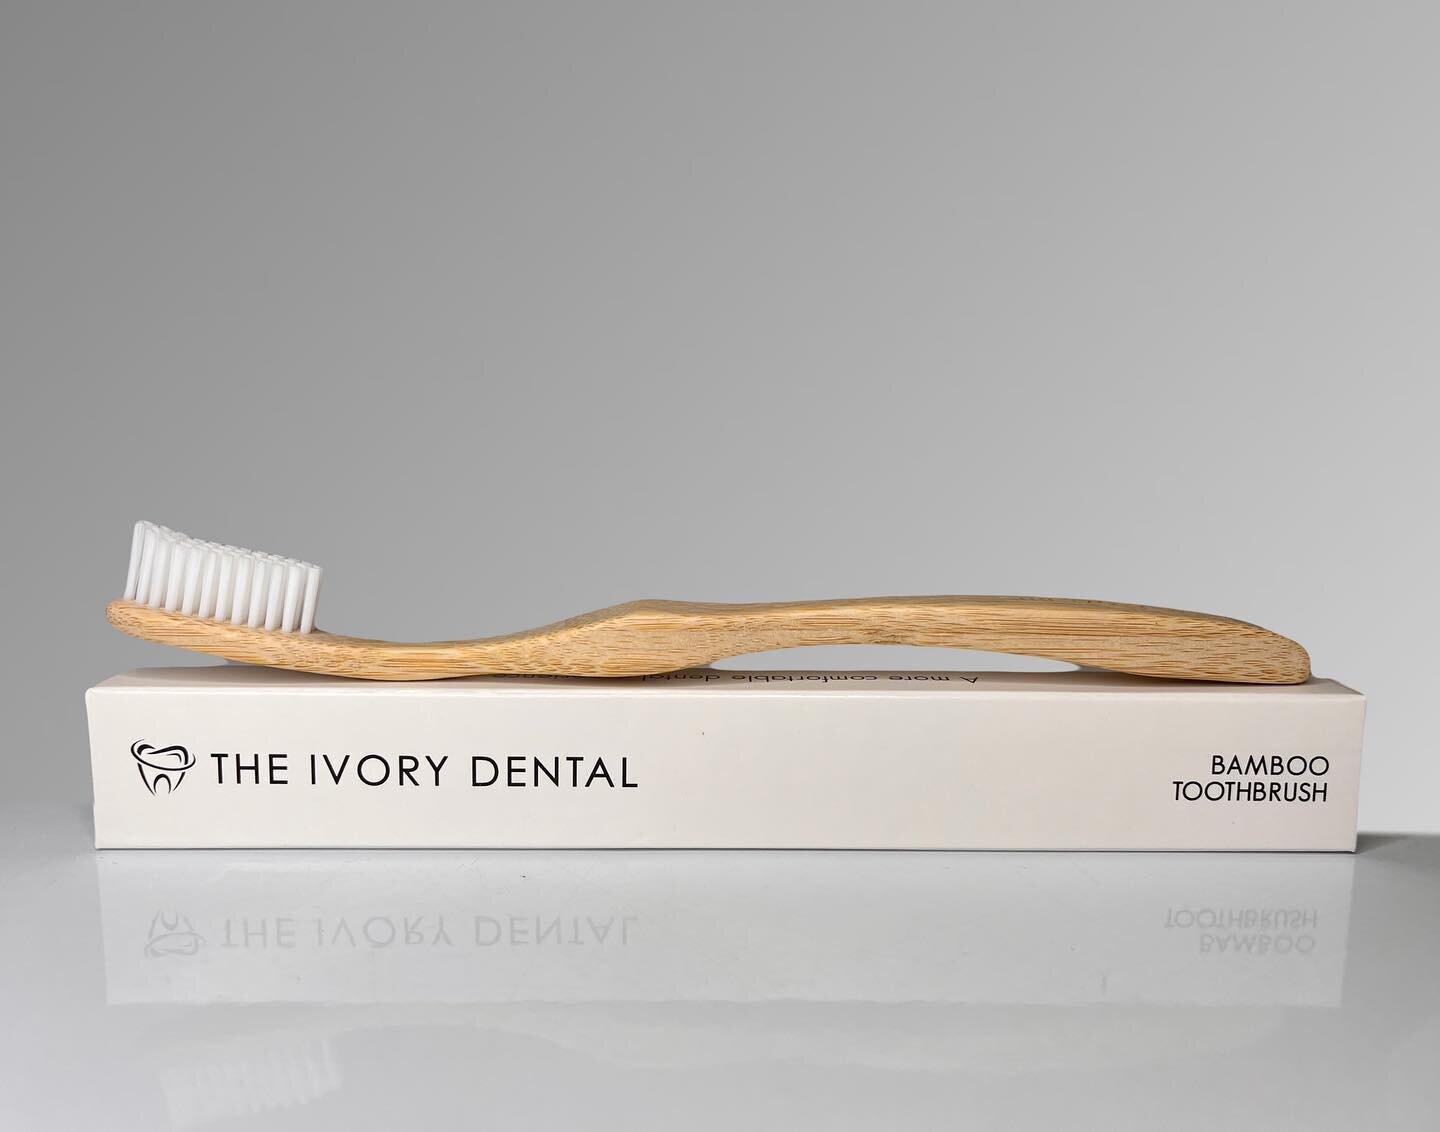 Did you know we had toothbrushes custom made just for our patients? Every new patient and returning patient receives a soft bristled bamboo toothbrush with your patient kit! We custom designed these toothbrushes to be kind to your teeth and gums, whi